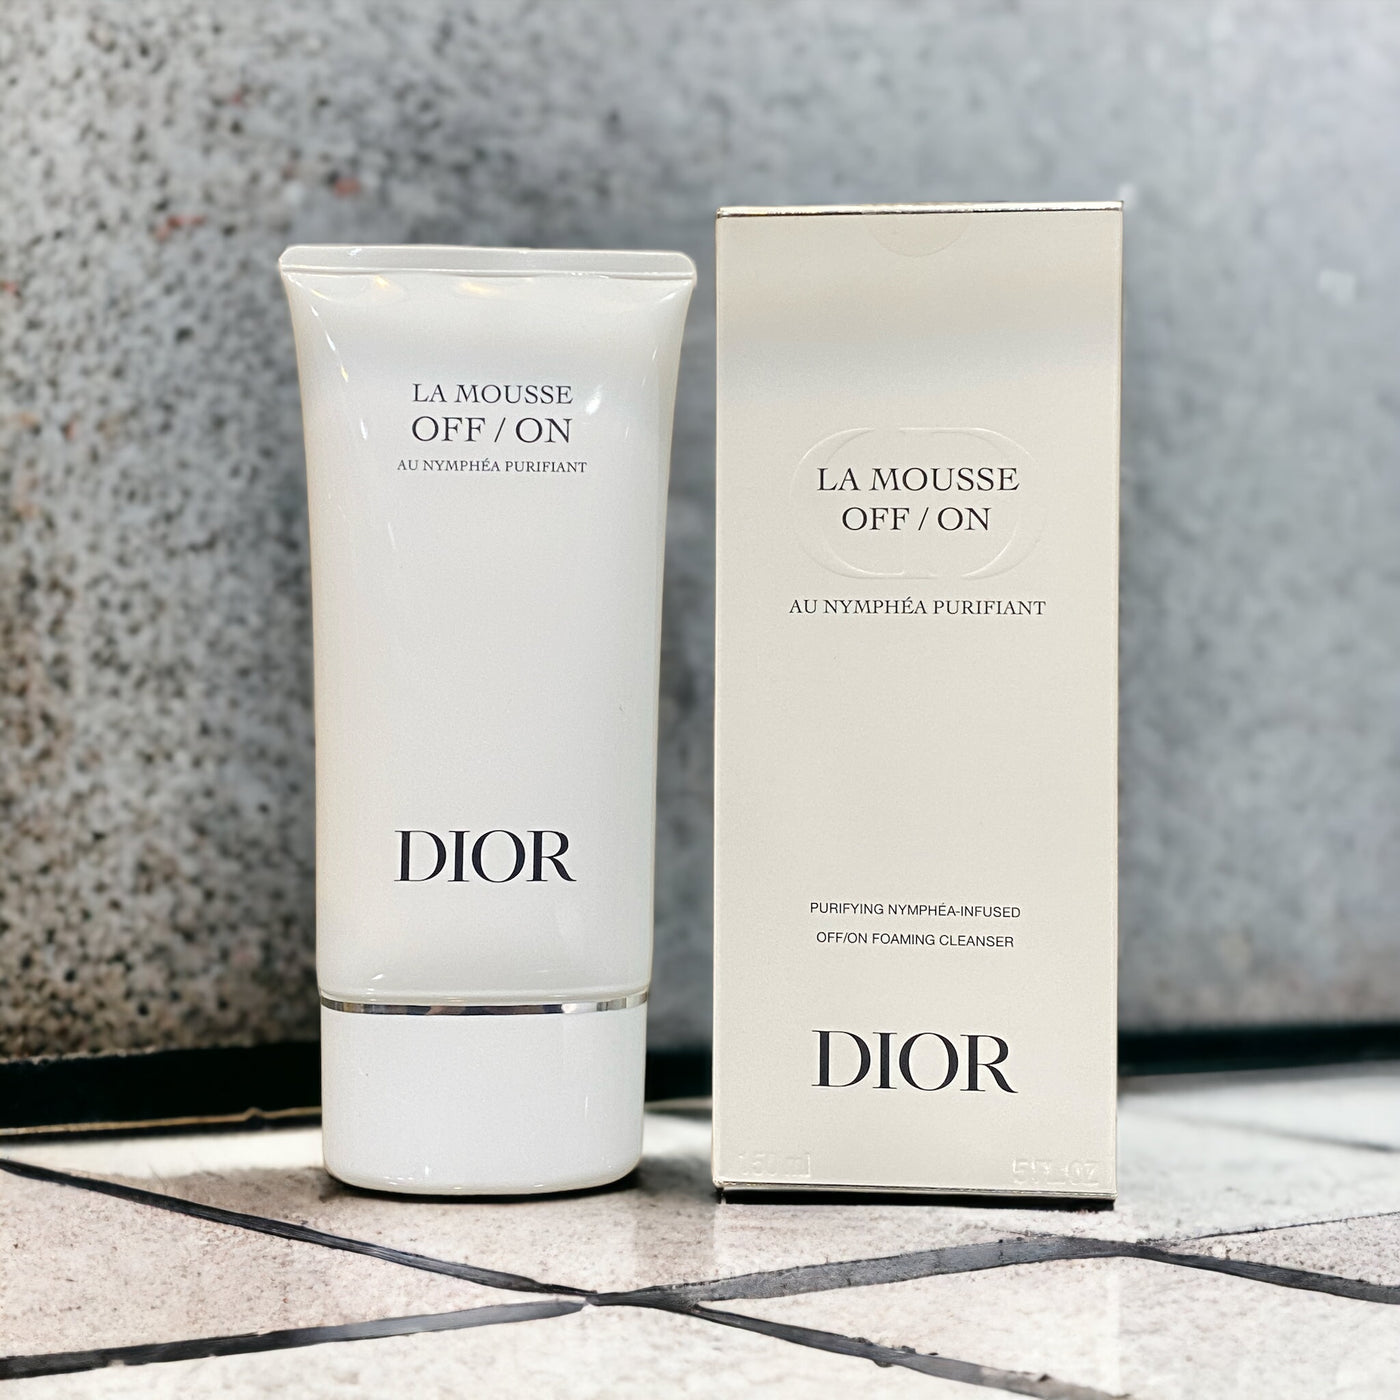 DIOR OFF/ON FOAMING CLEANSER